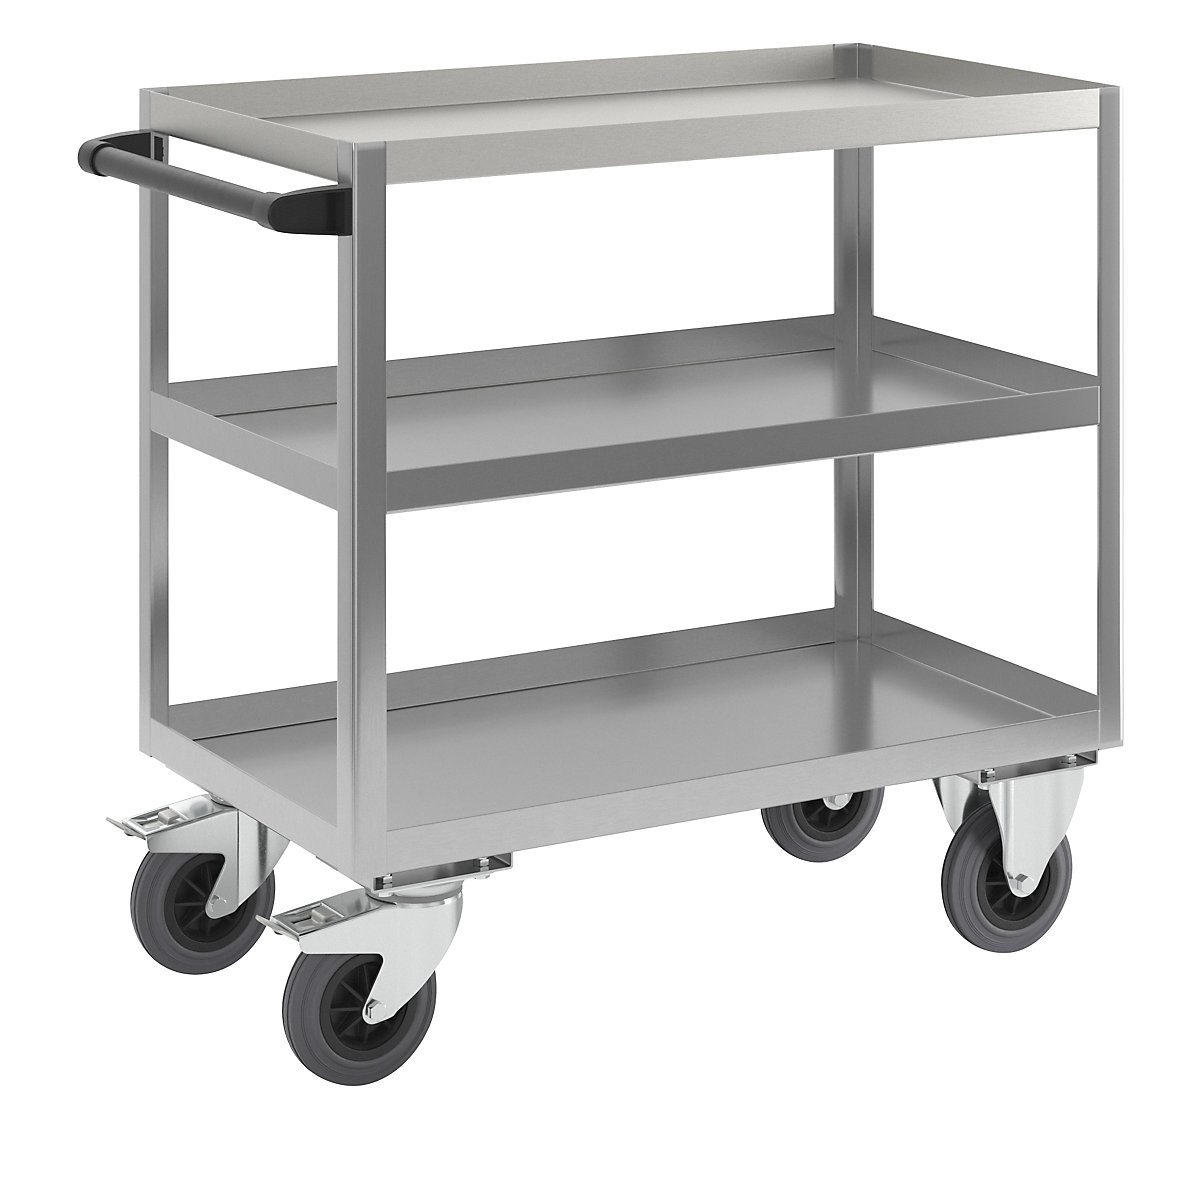 Stainless steel platform trolley – eurokraft pro, LxW 900 x 500 mm, overall height 915 mm, max. load 350 kg-10